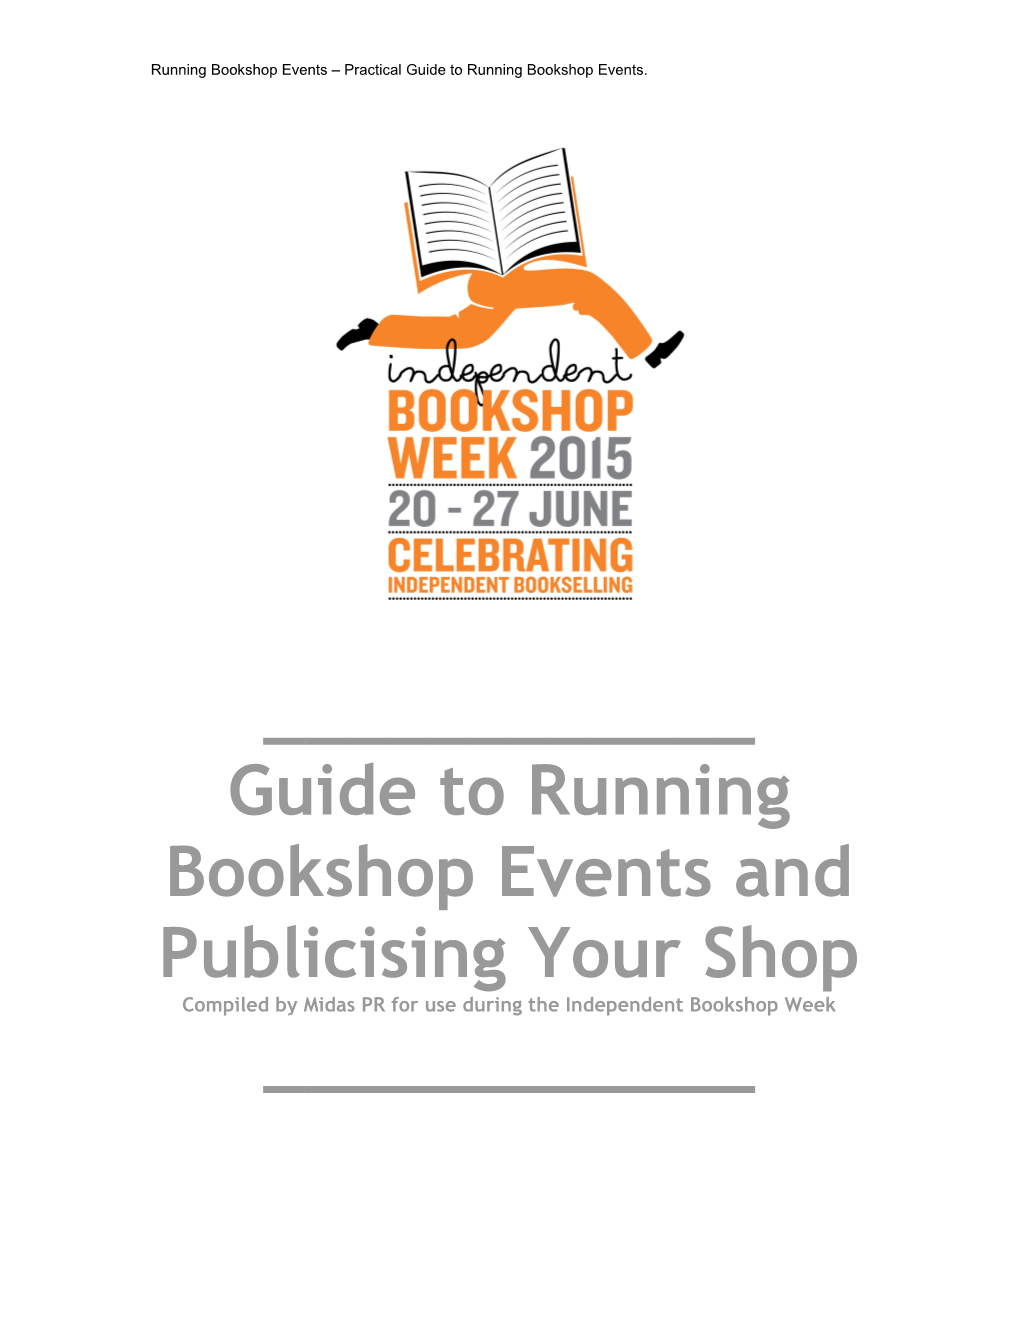 Running Bookshop Events and Publicising Your Shop